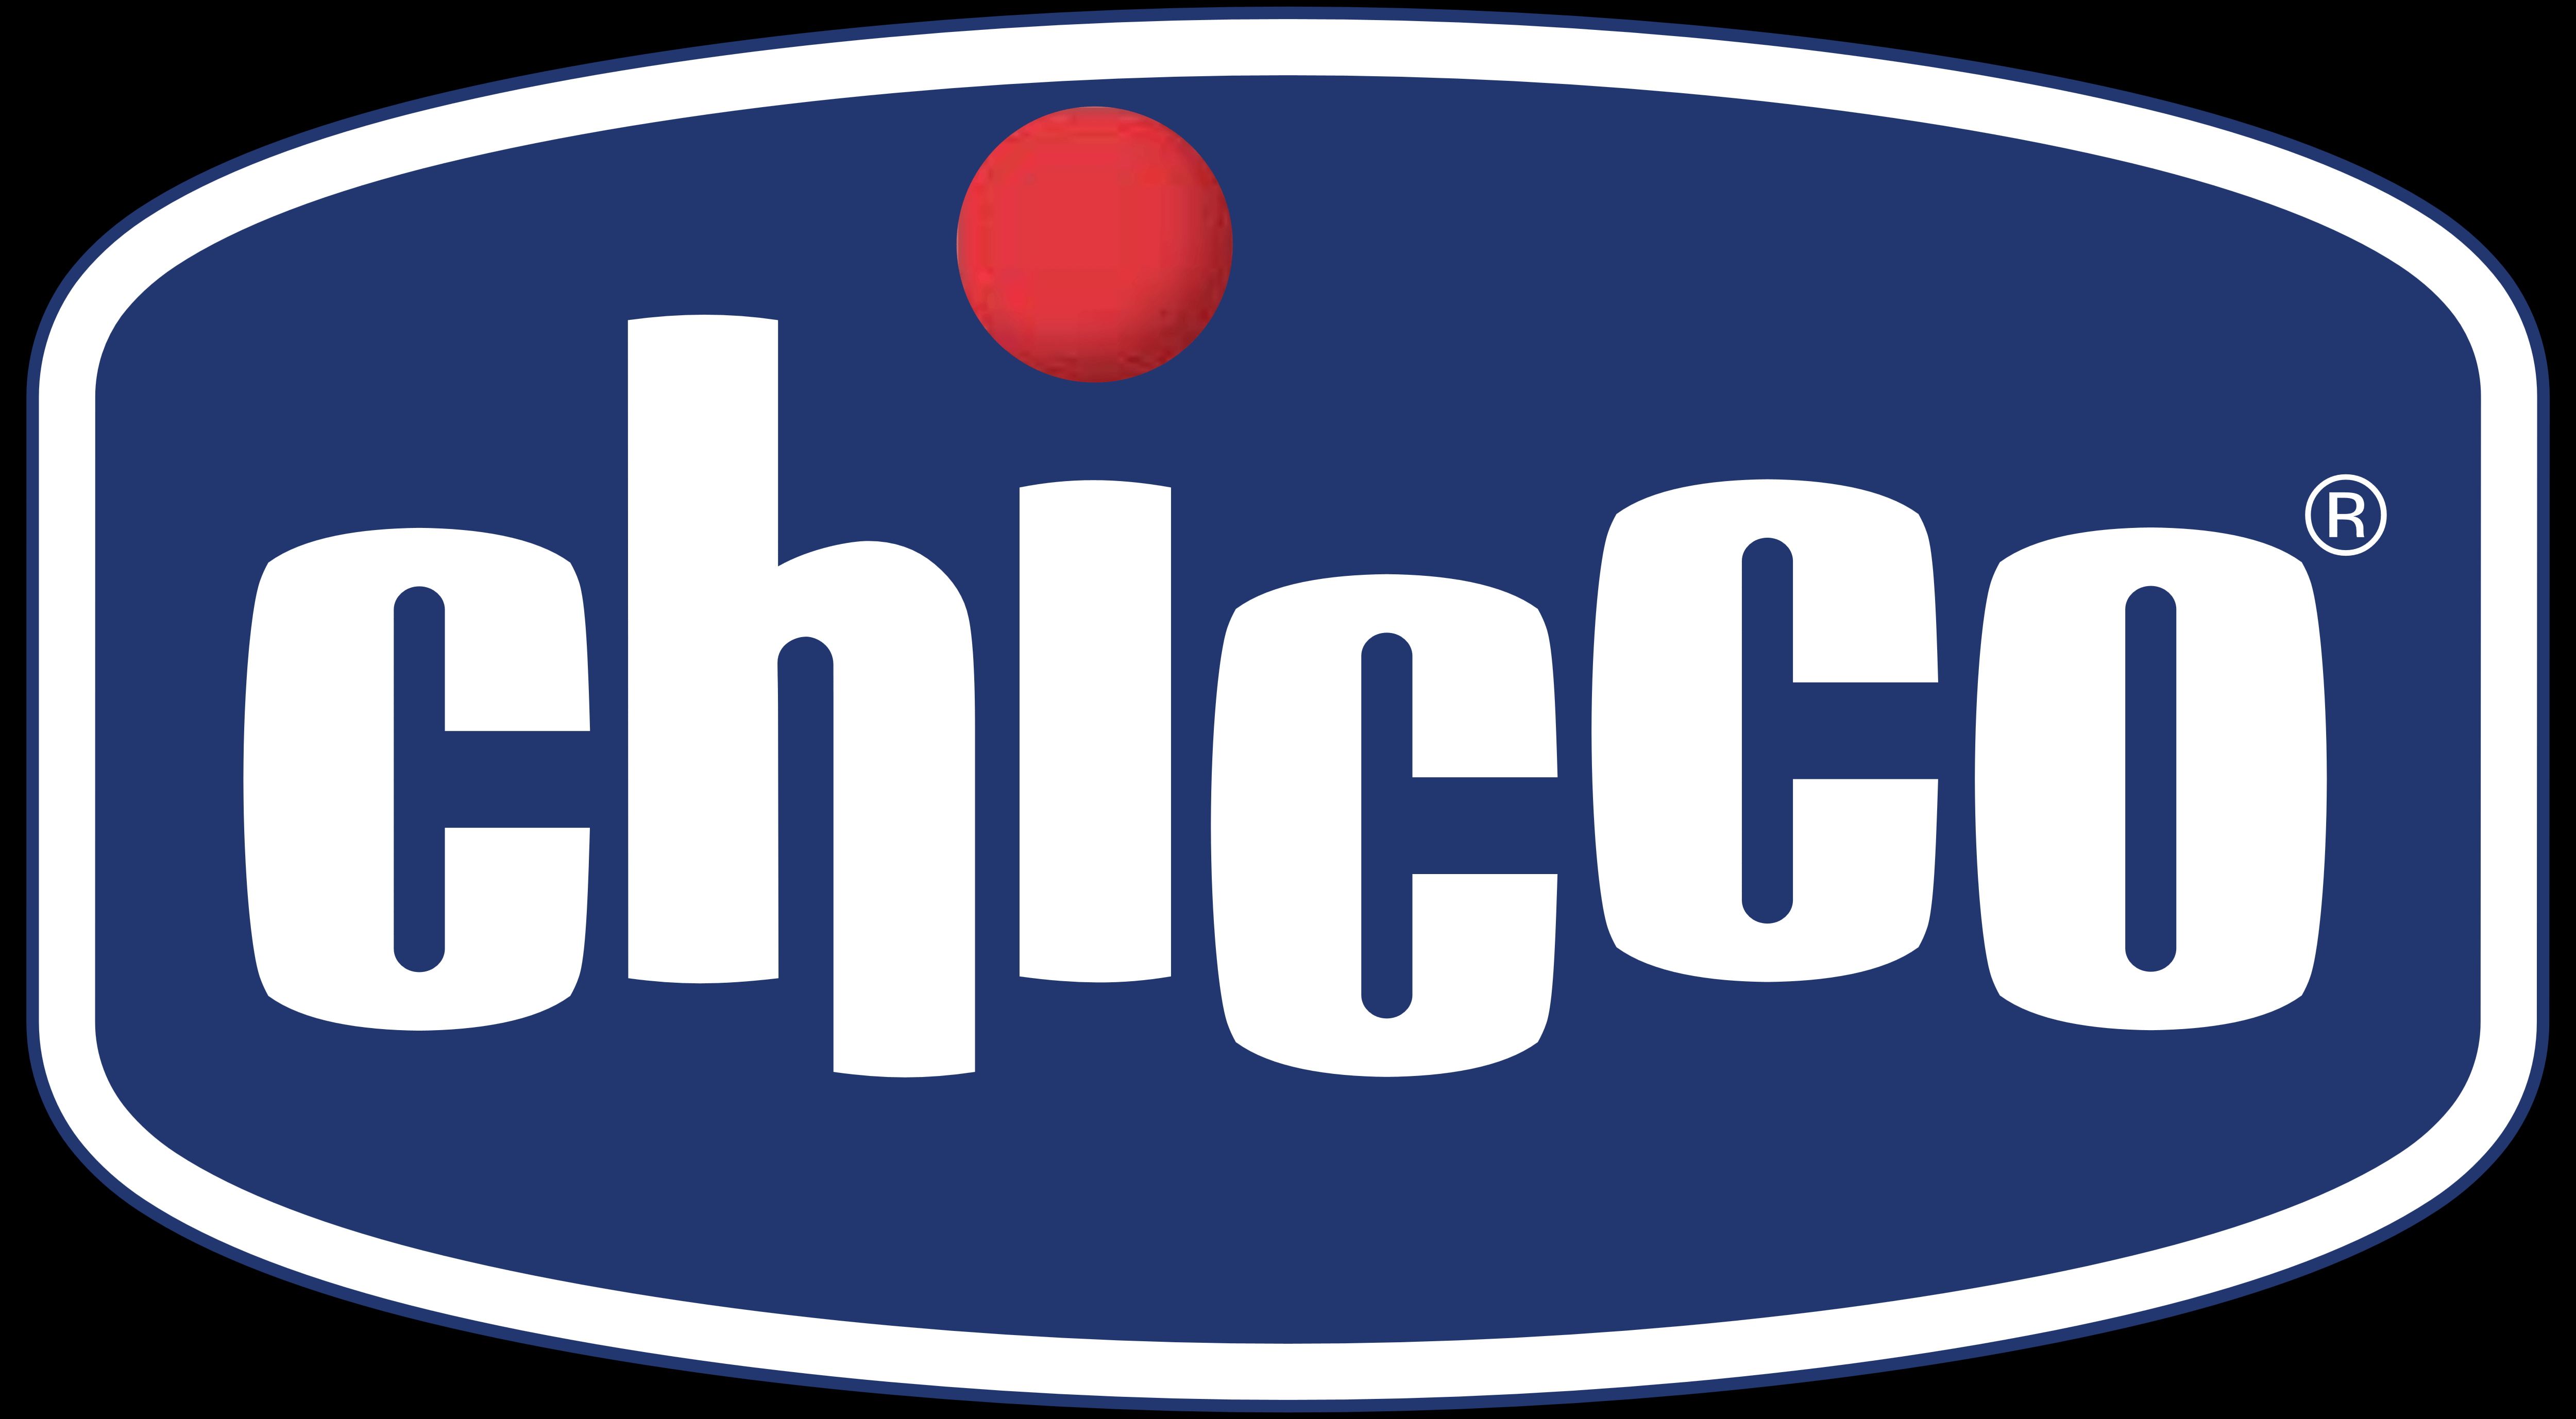 Chicco Logo - Page 9 | Chicco Brand Authorised Products | ThePharmacy